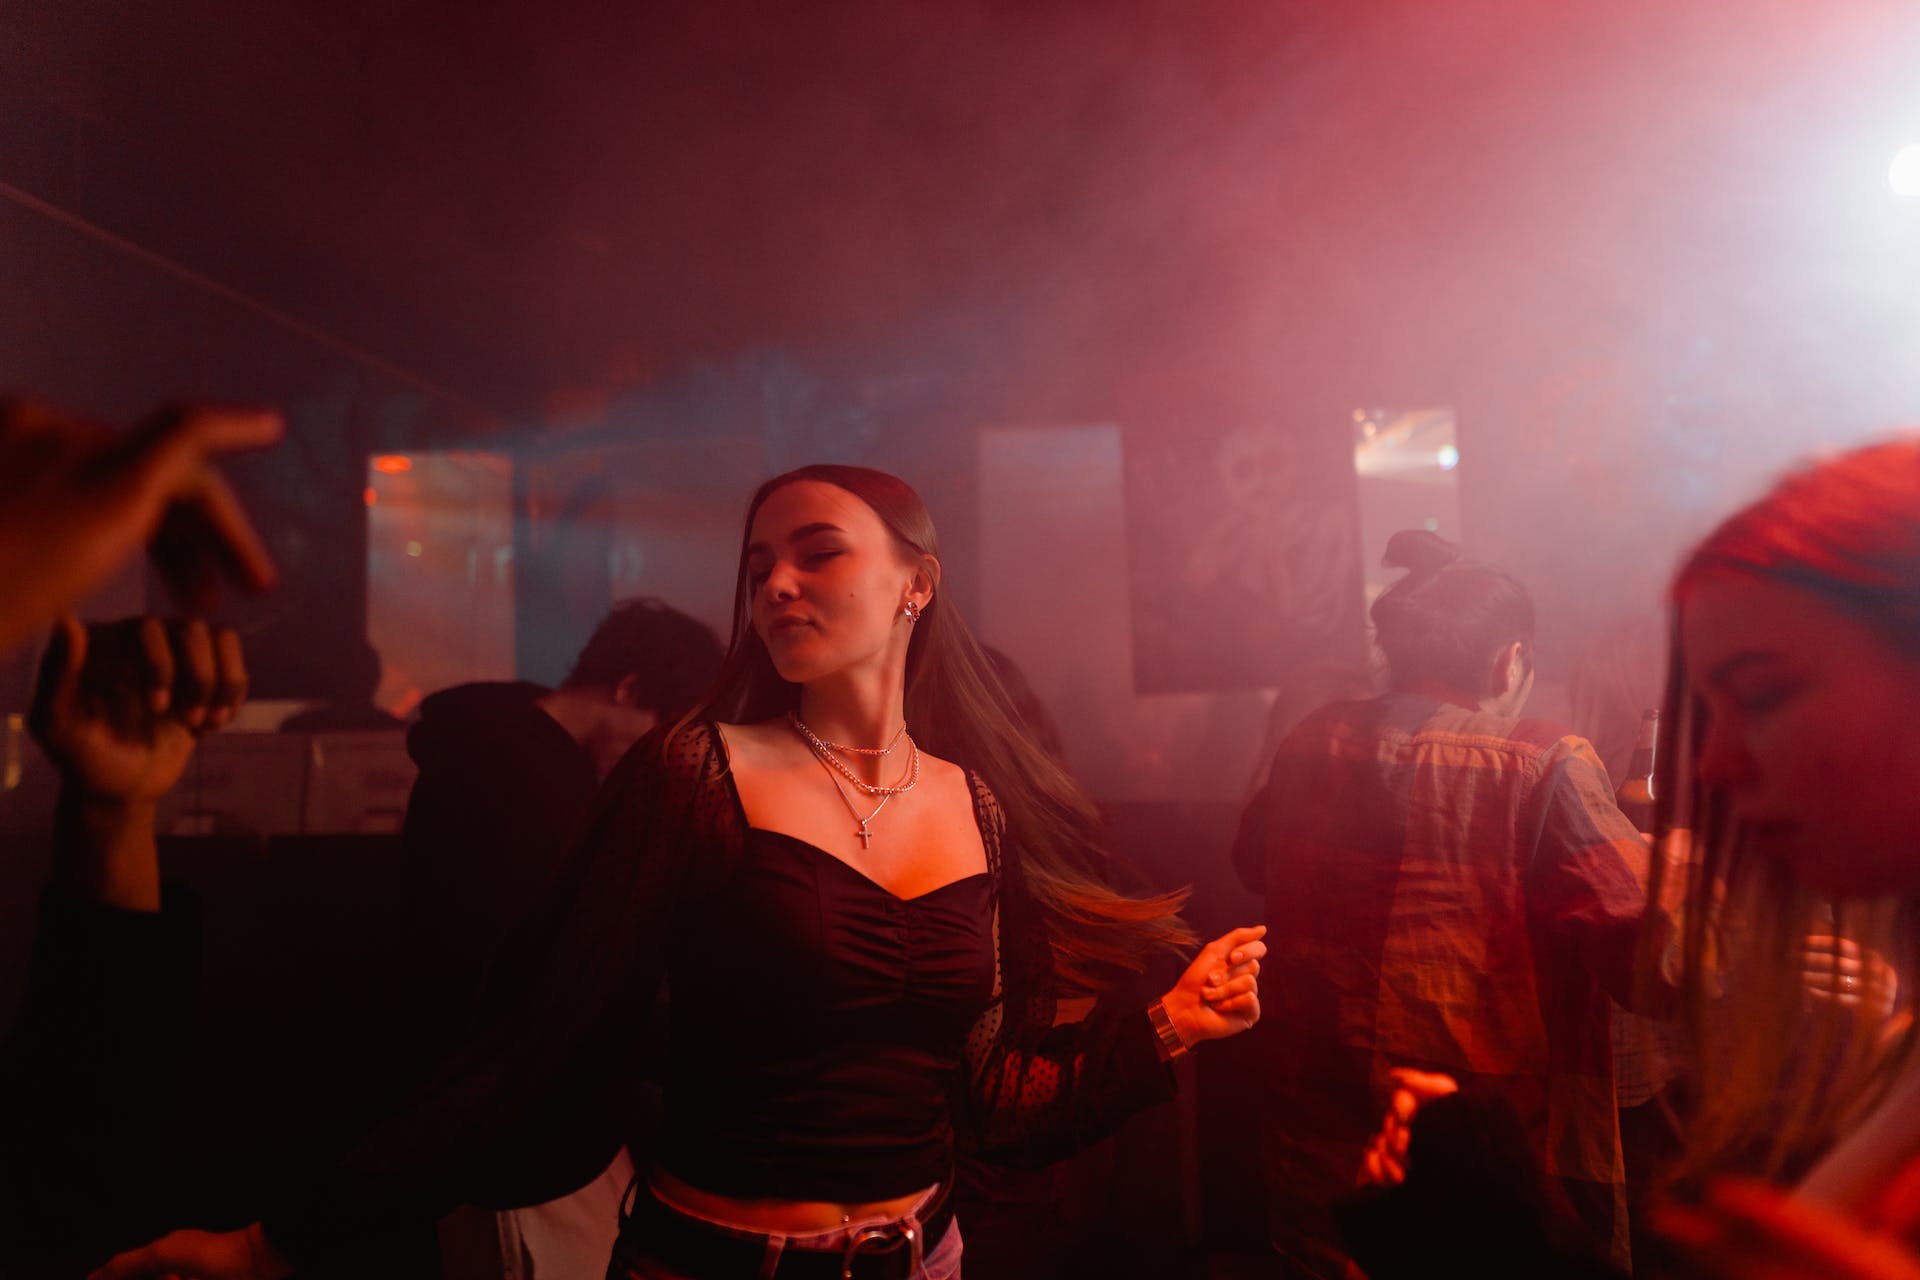 A woman dancing at a party | Source: Pexels